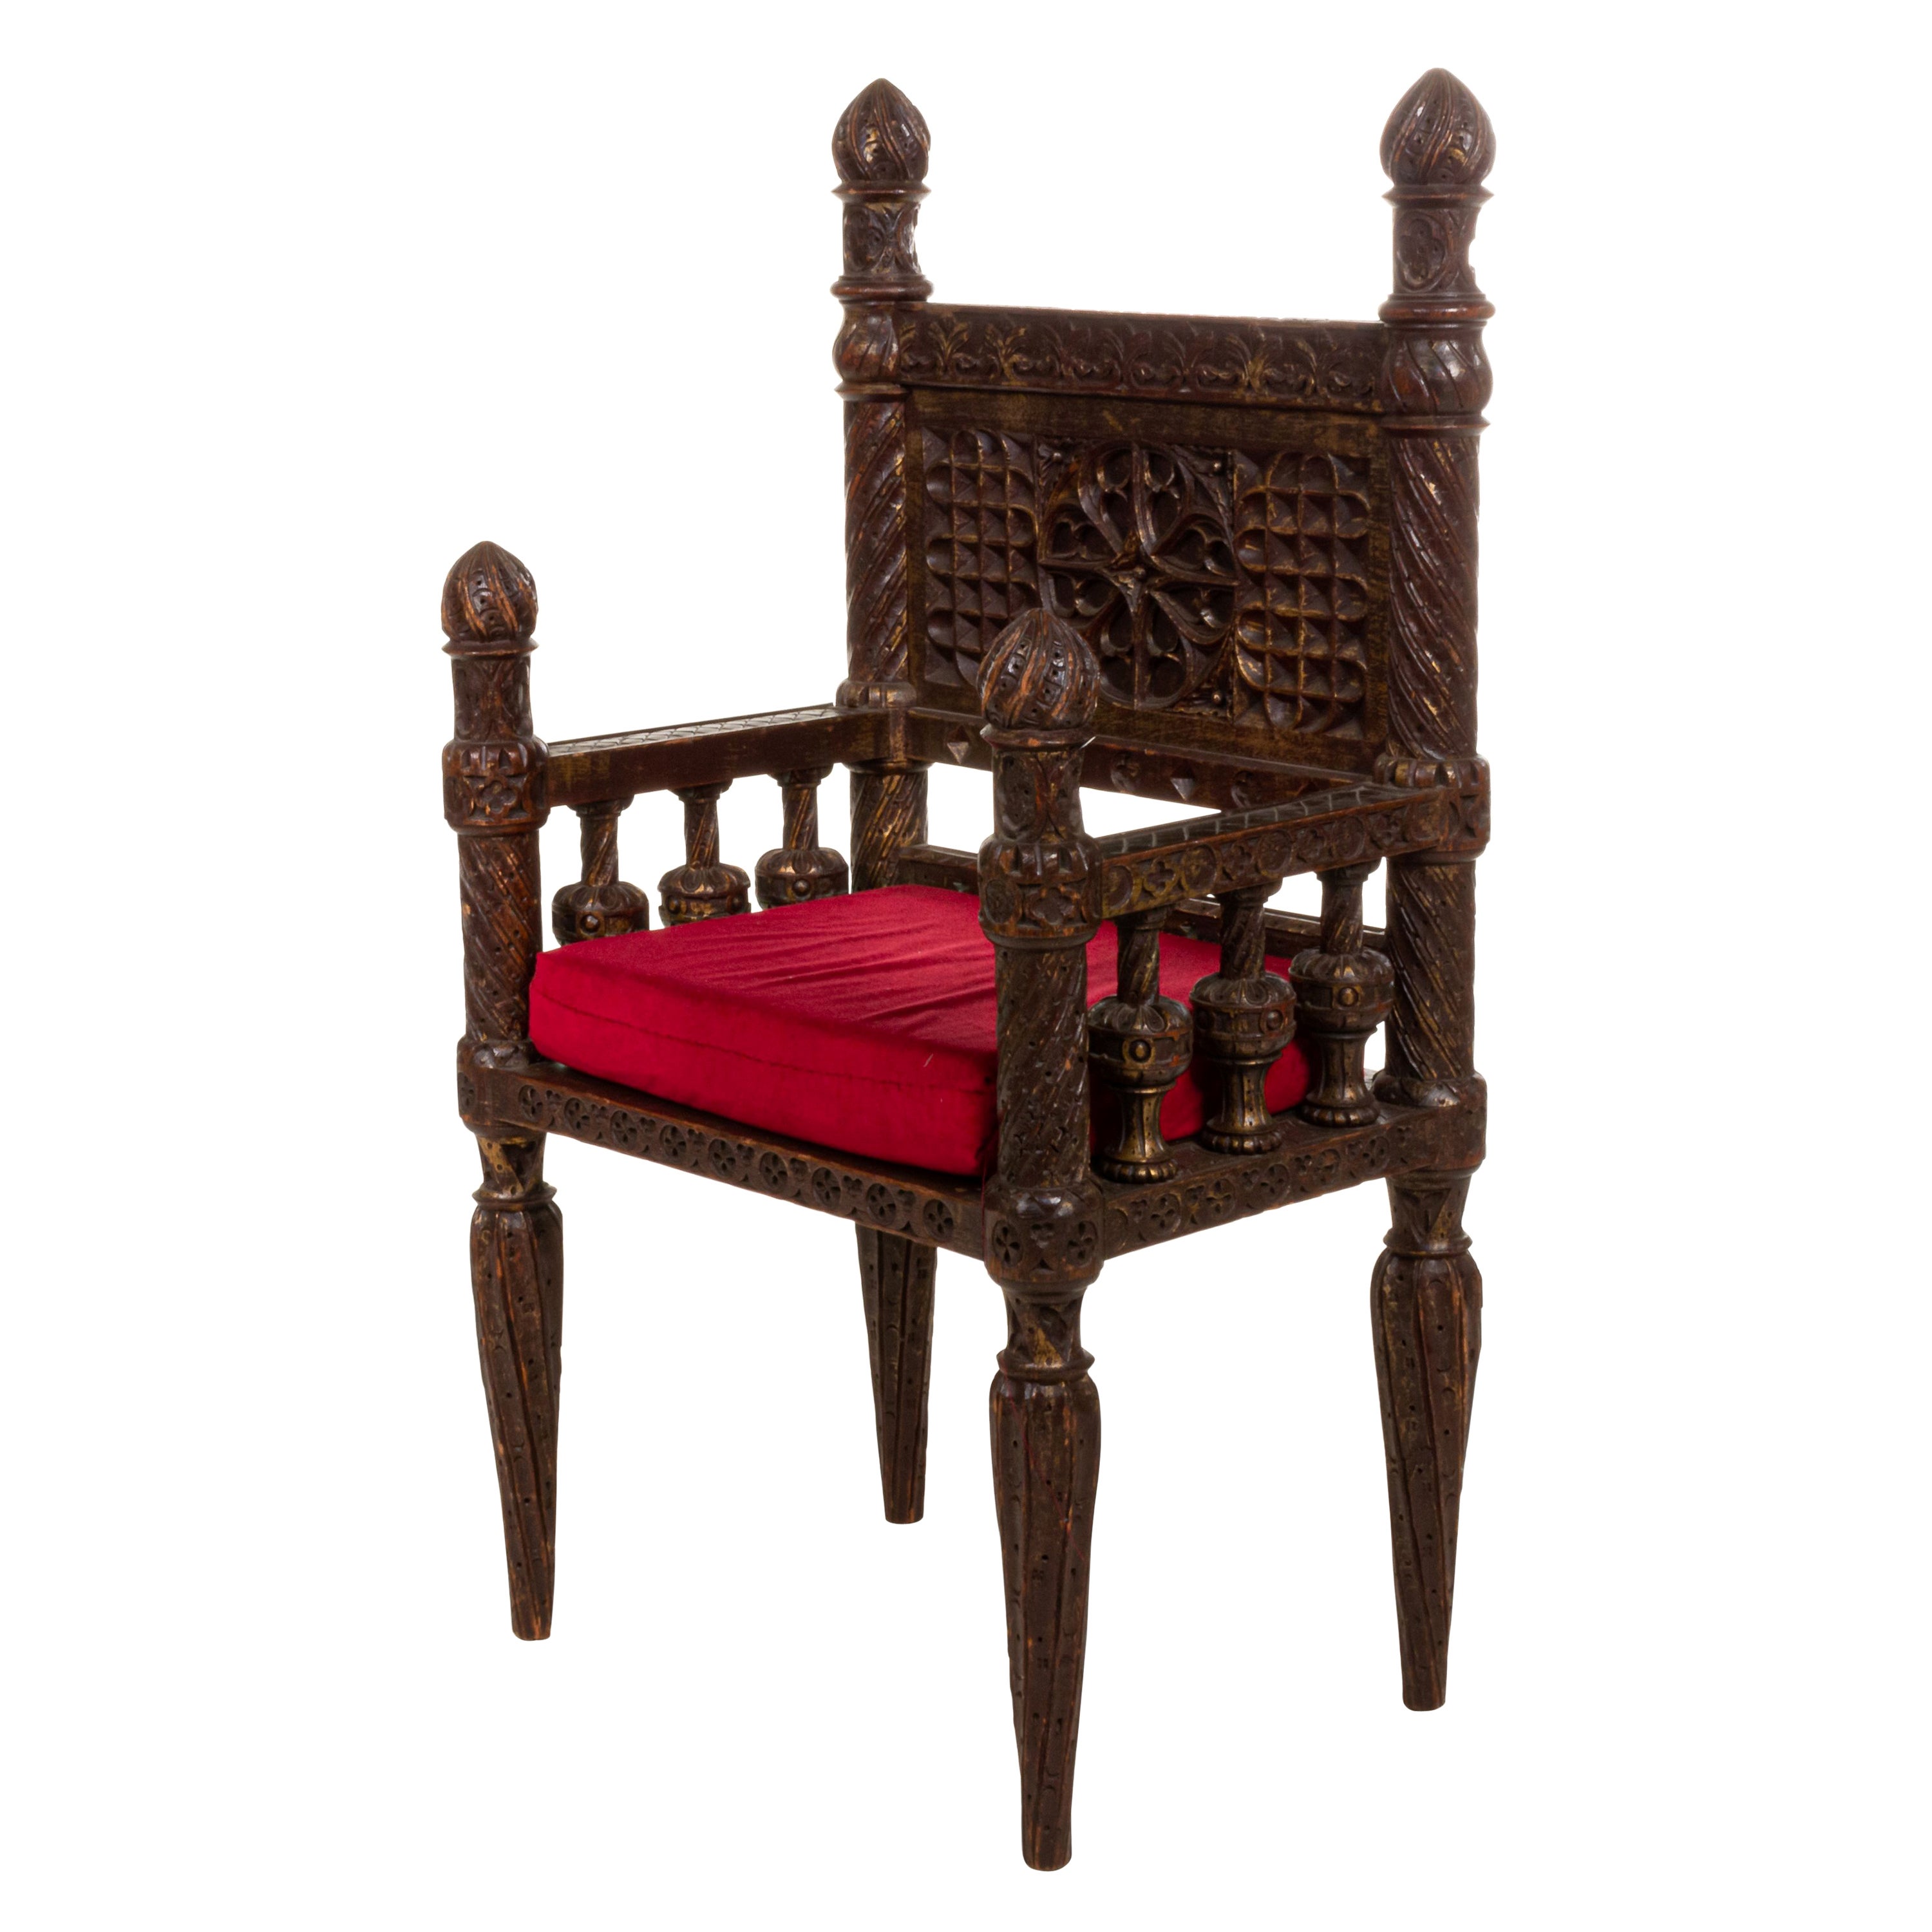 Gothic Revival Style 19th Century Burgundy Arm Chair For Sale